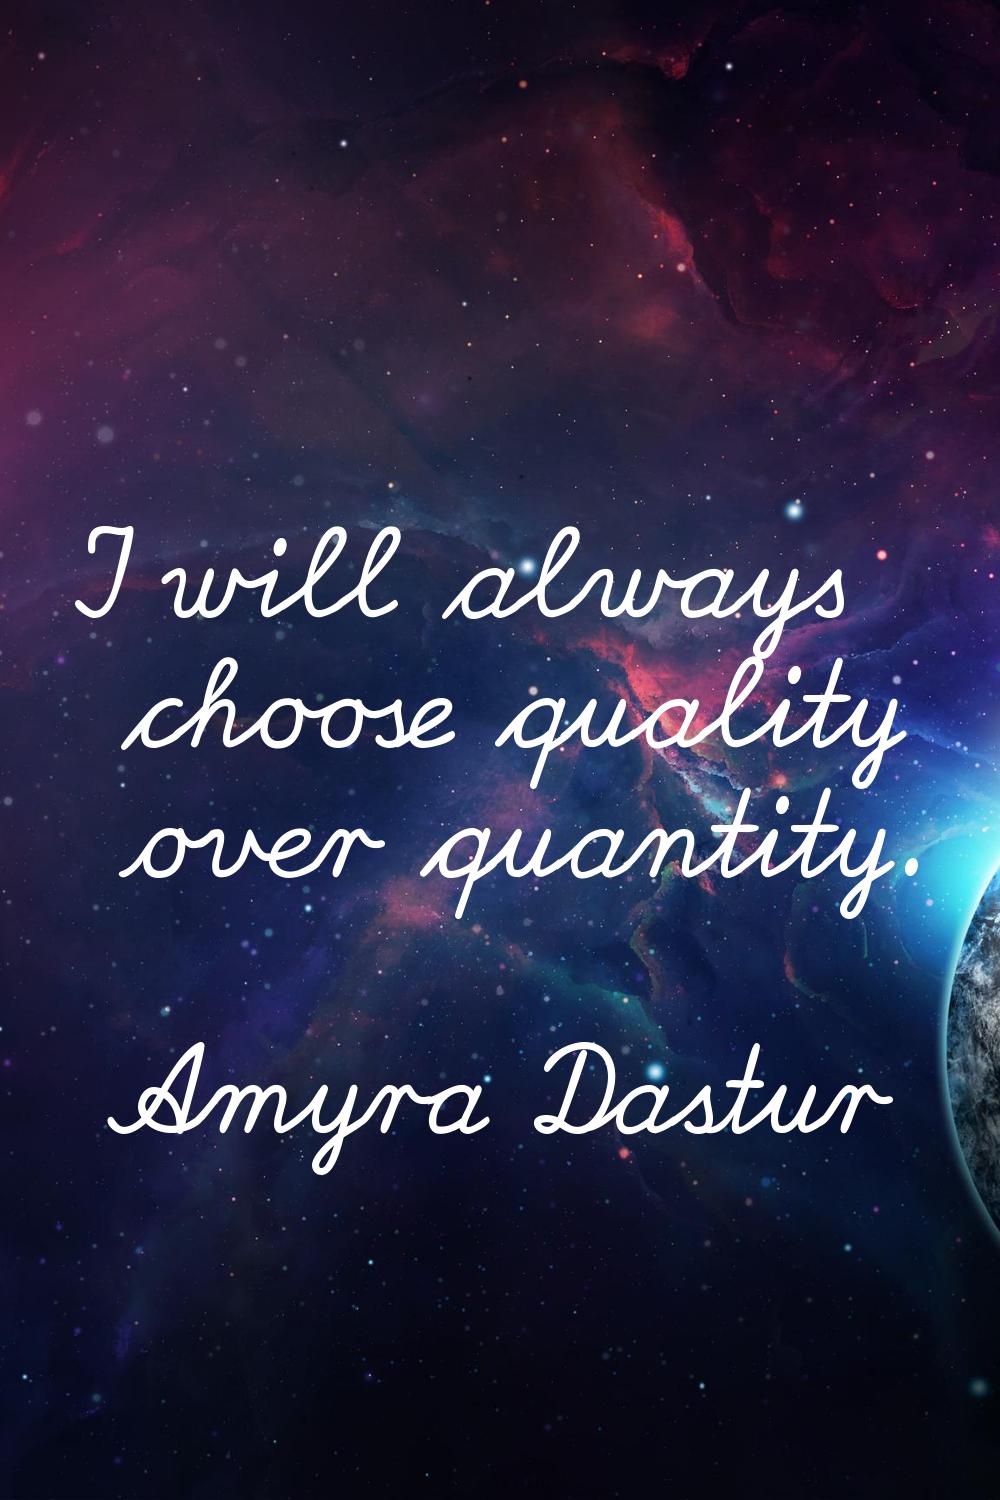 I will always choose quality over quantity.